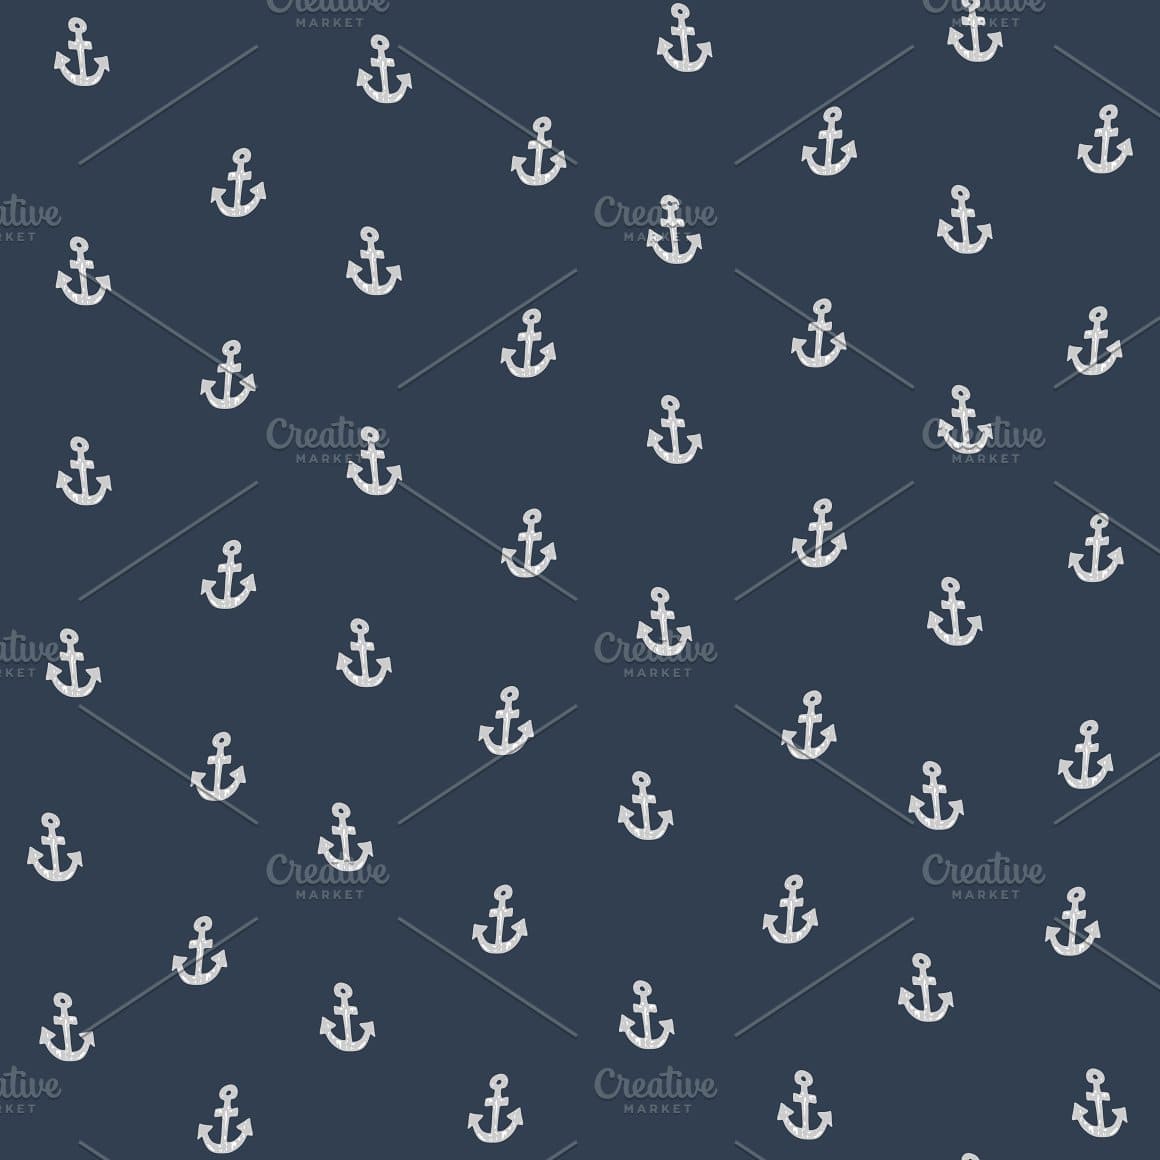 Light gray anchors of a classic shape on a dark blue background.